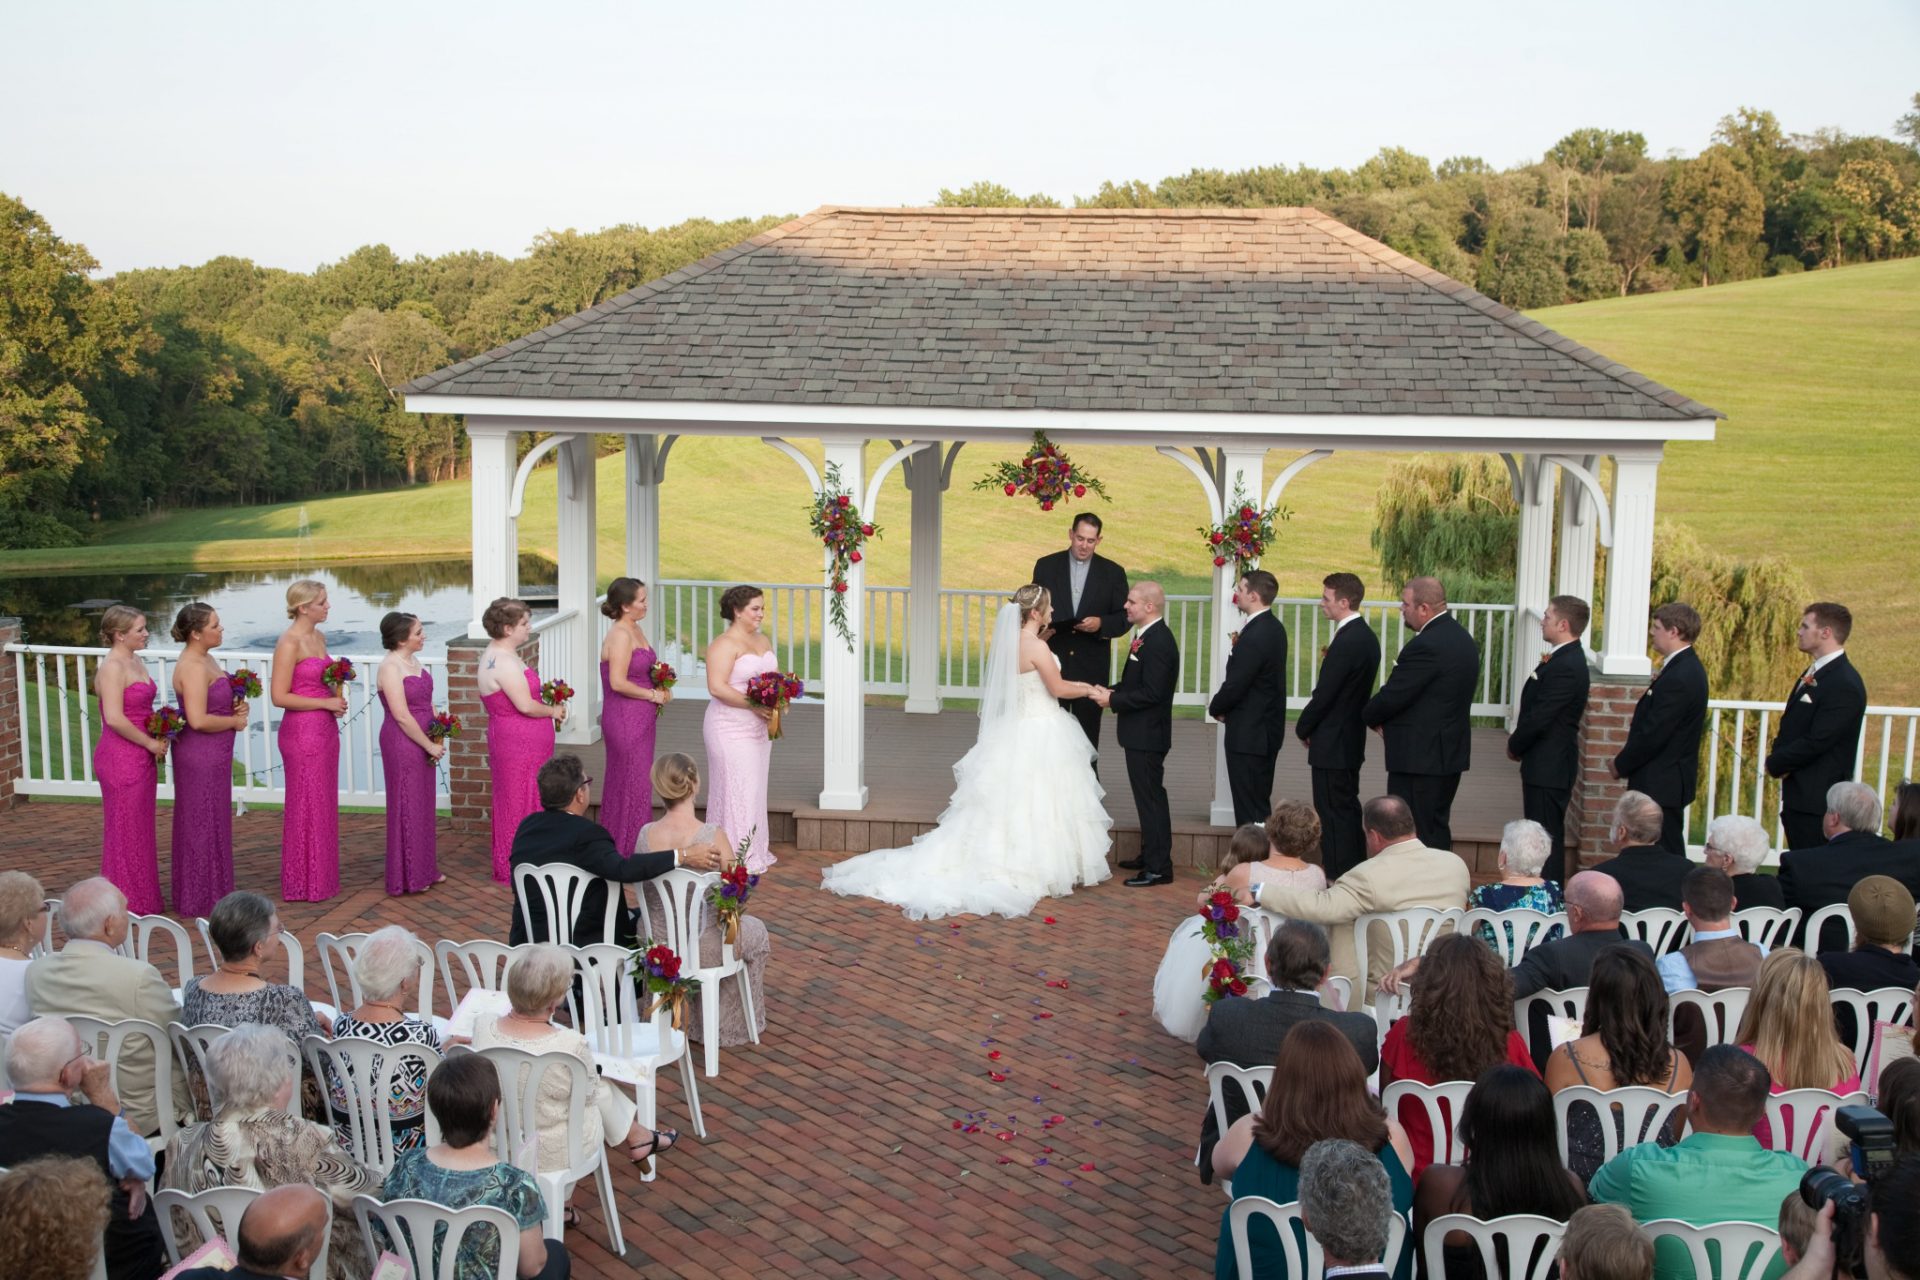 Bride and Groom exchange vows on pavilion during outdoor wedding ceremony